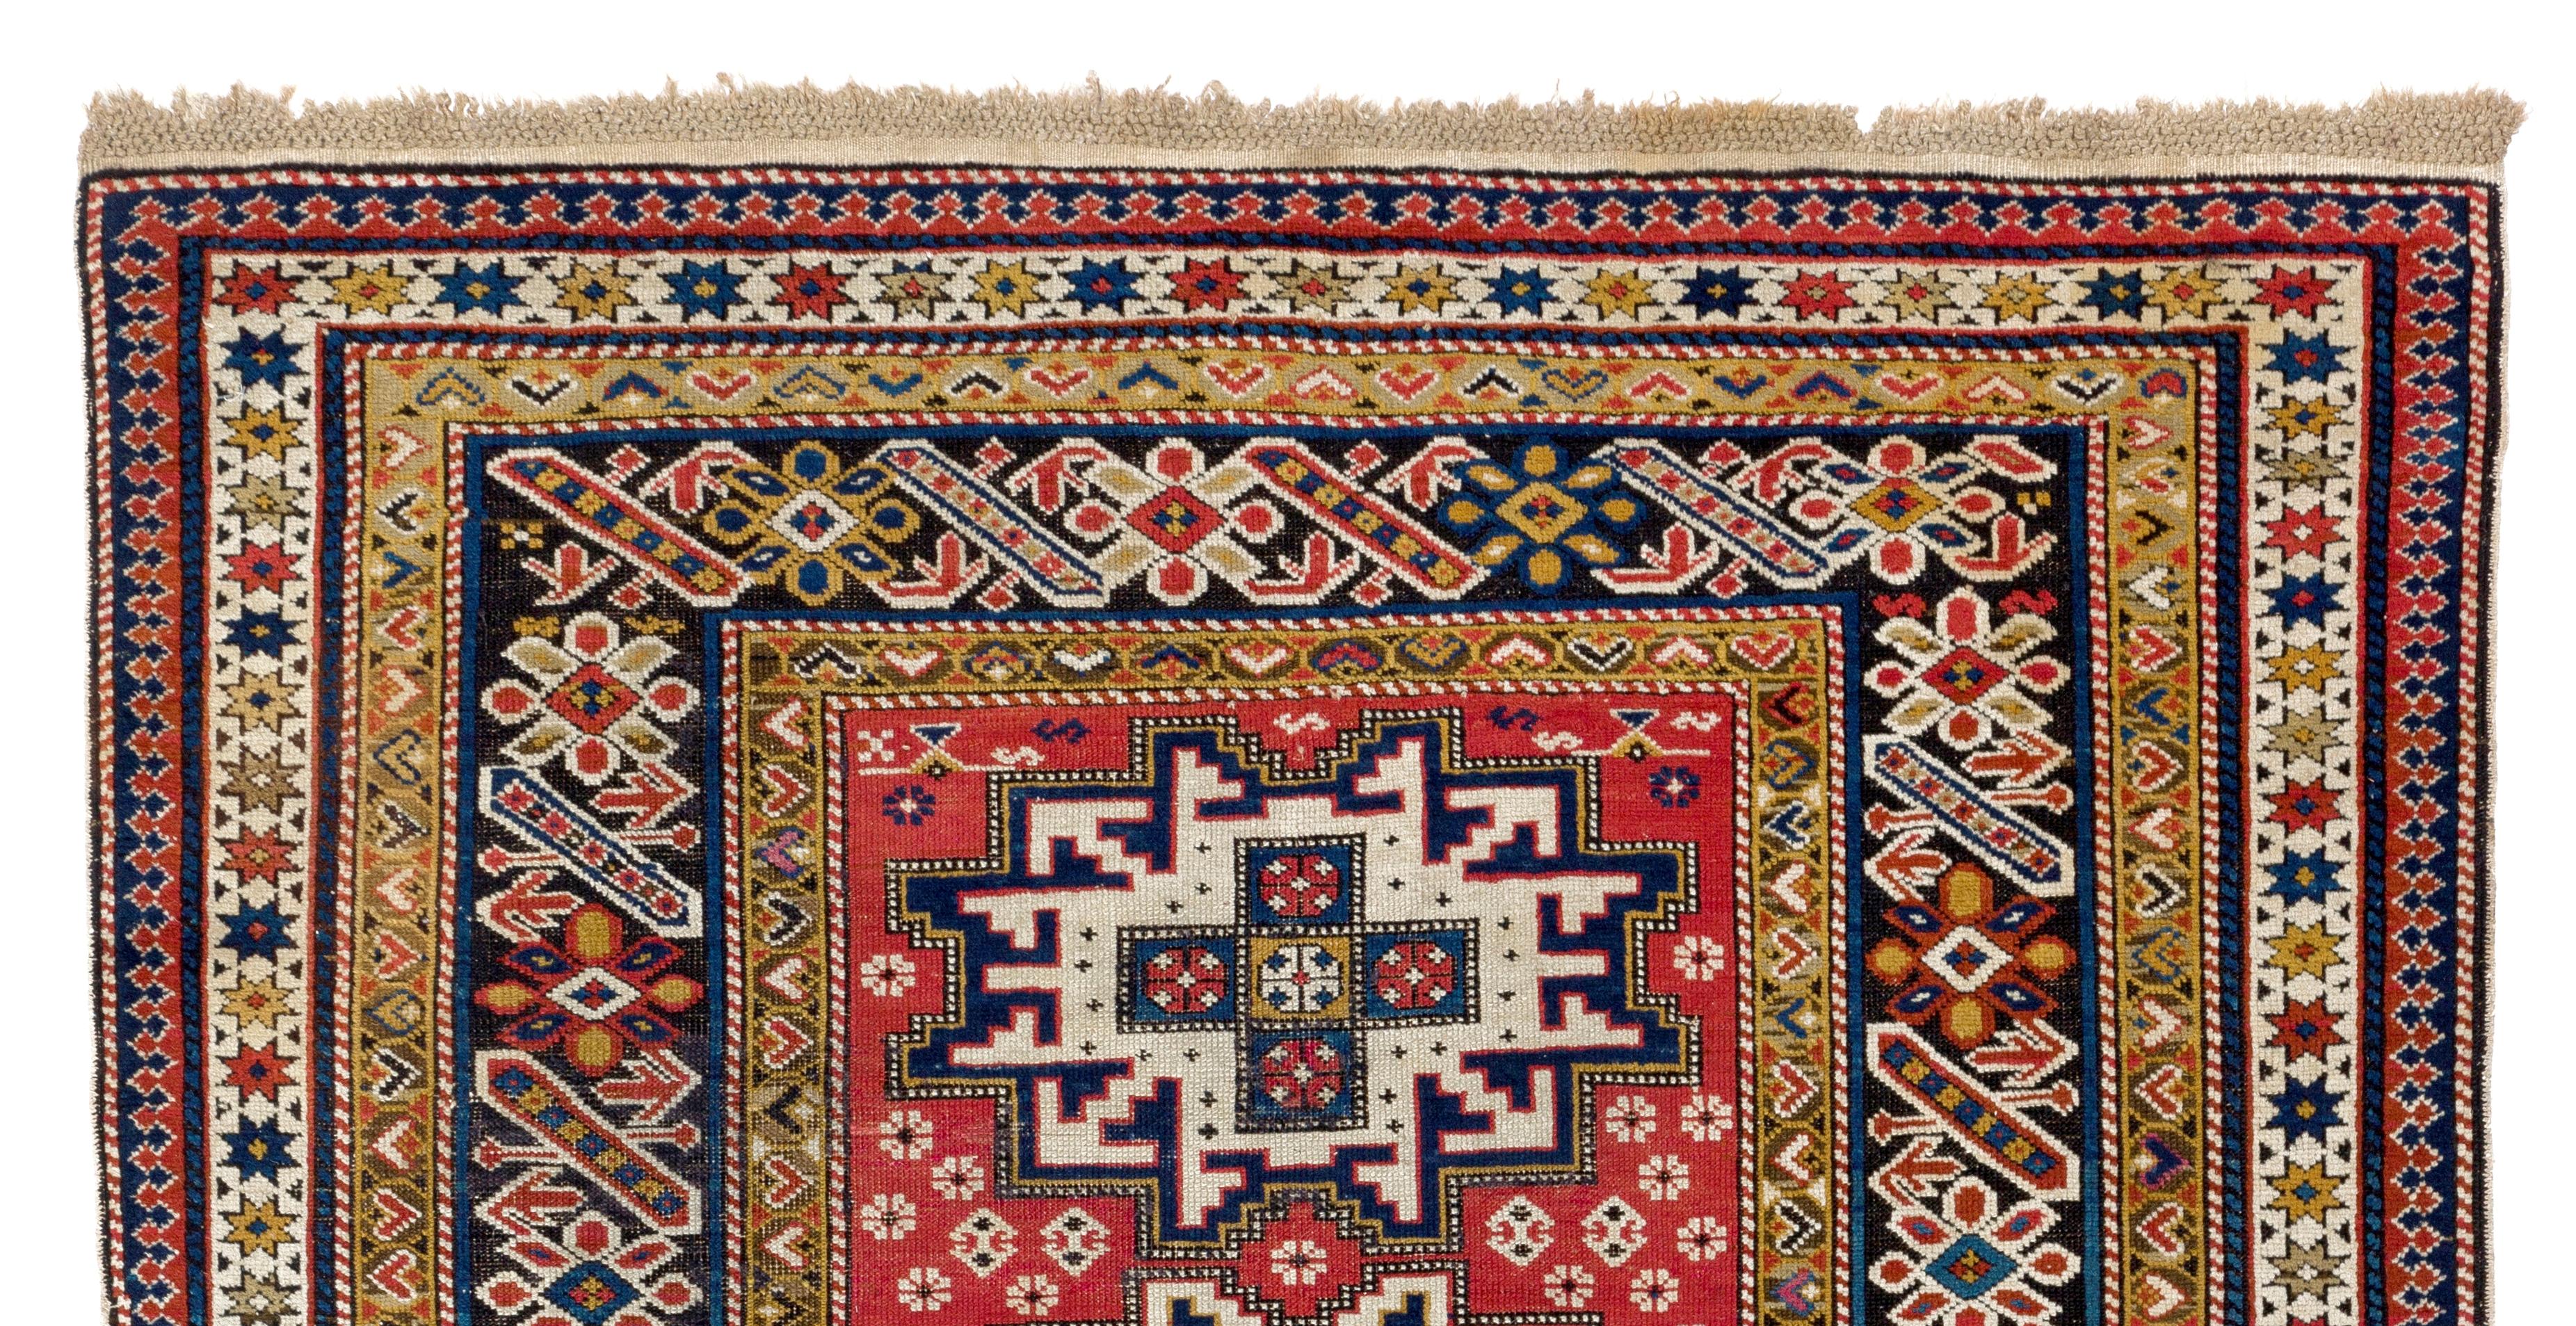 Antique Caucasian Chi Chi Shirvan rug. Finely hand-knotted with even medium wool pile on wool foundation. Very good condition. Washed professionally.
Measures: 4 x 6.3 ft.